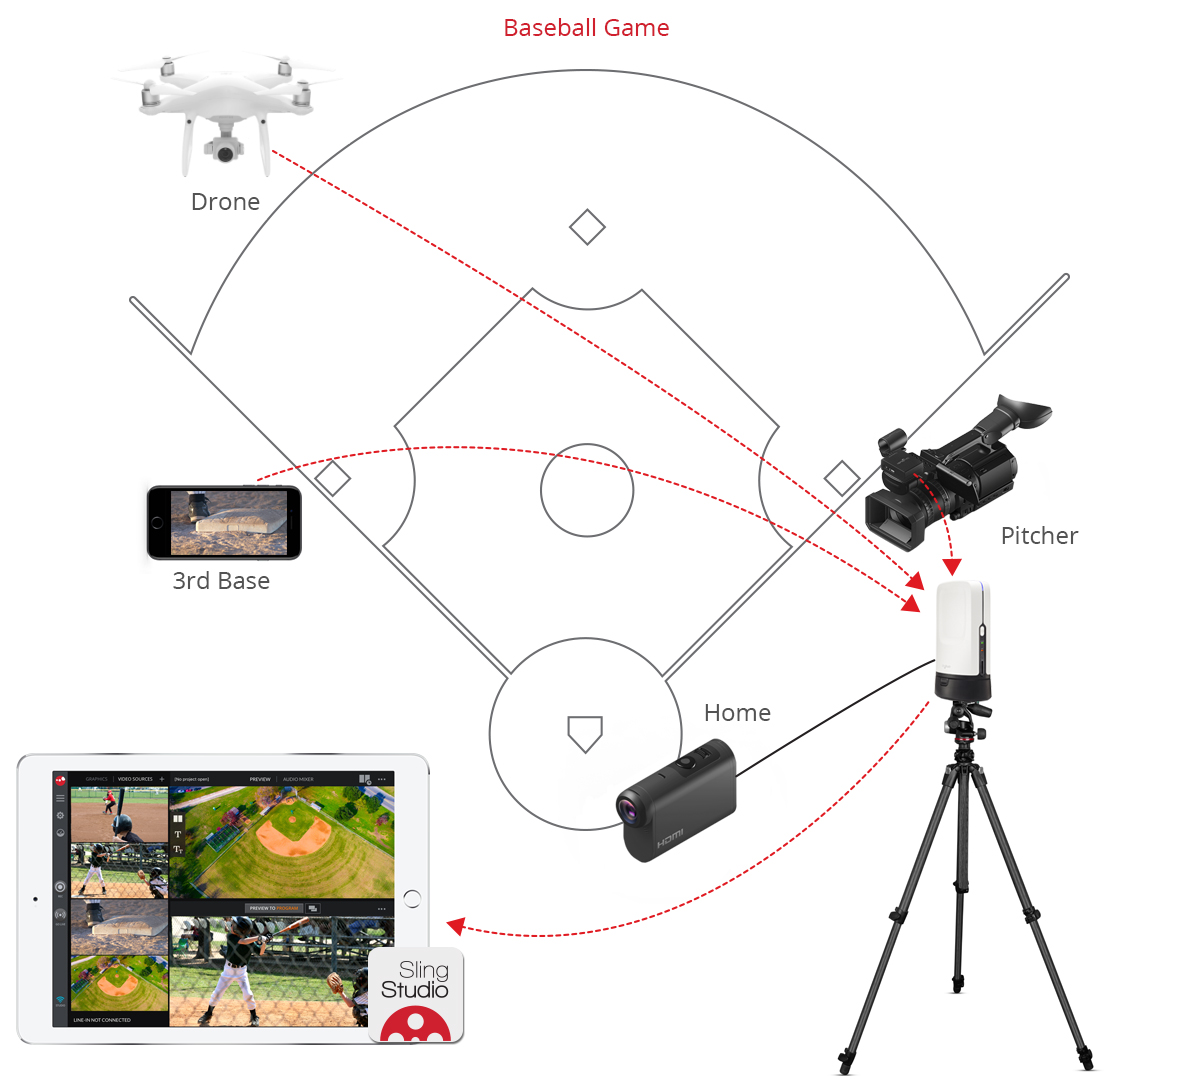 Diagram on how to live stream                                                                       baseball games and other sporting                                                                      events using SlingStudio video                                                                      switcher